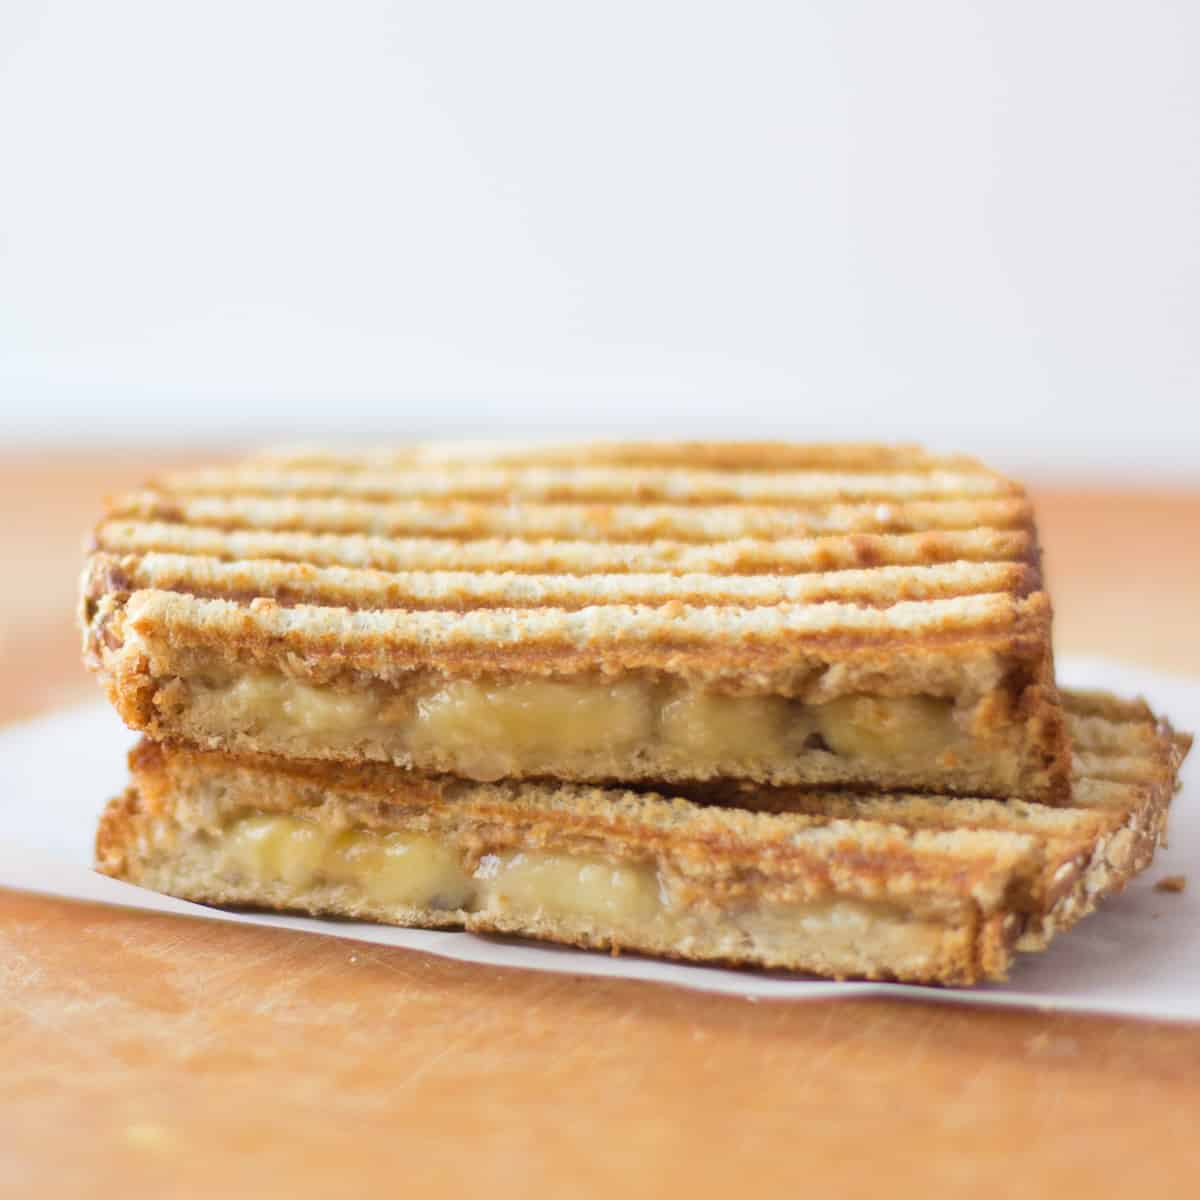 Two peanut butter banana sandwich halves stacked.